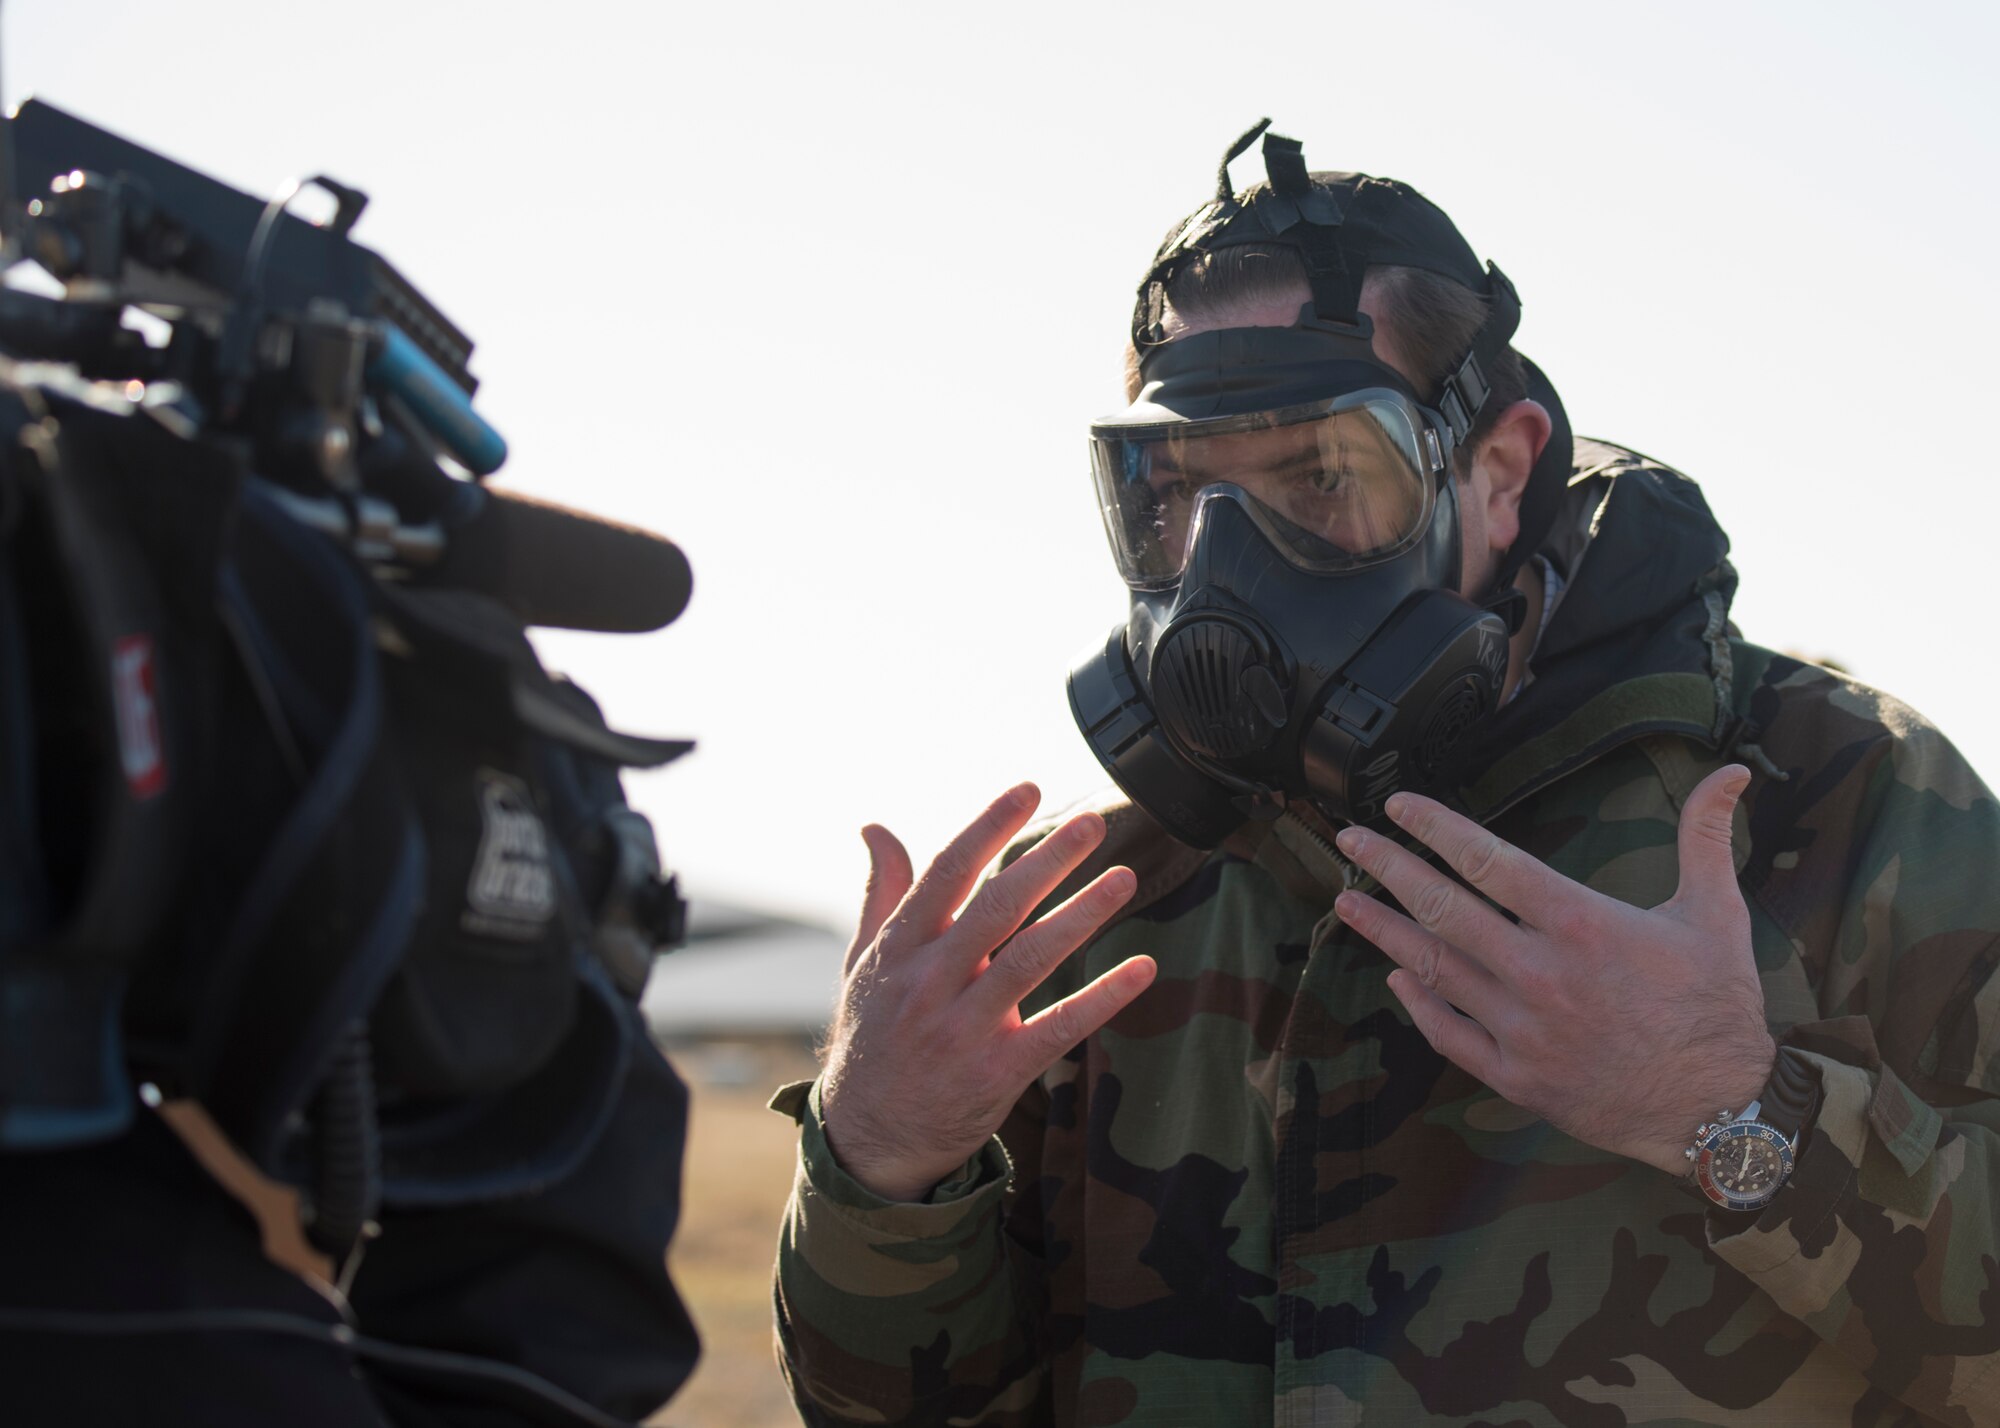 Peter Maxwell, KHQ reporter, experiences what it’s like to work in chemical protective gear during a Year of the Defender media day event at Fairchild Air Force Base, Washington, Oct. 29, 2019. Chemical, biological radiological and nuclear (CBRN) gear is a vital to protect Airmen in dangerous environments, but presents a challenge to work in, so CBRN training is a vital component in keeping U.S. forces able to operate in any situation. (U.S. Air Force photo by Senior Airman Ryan Lackey)